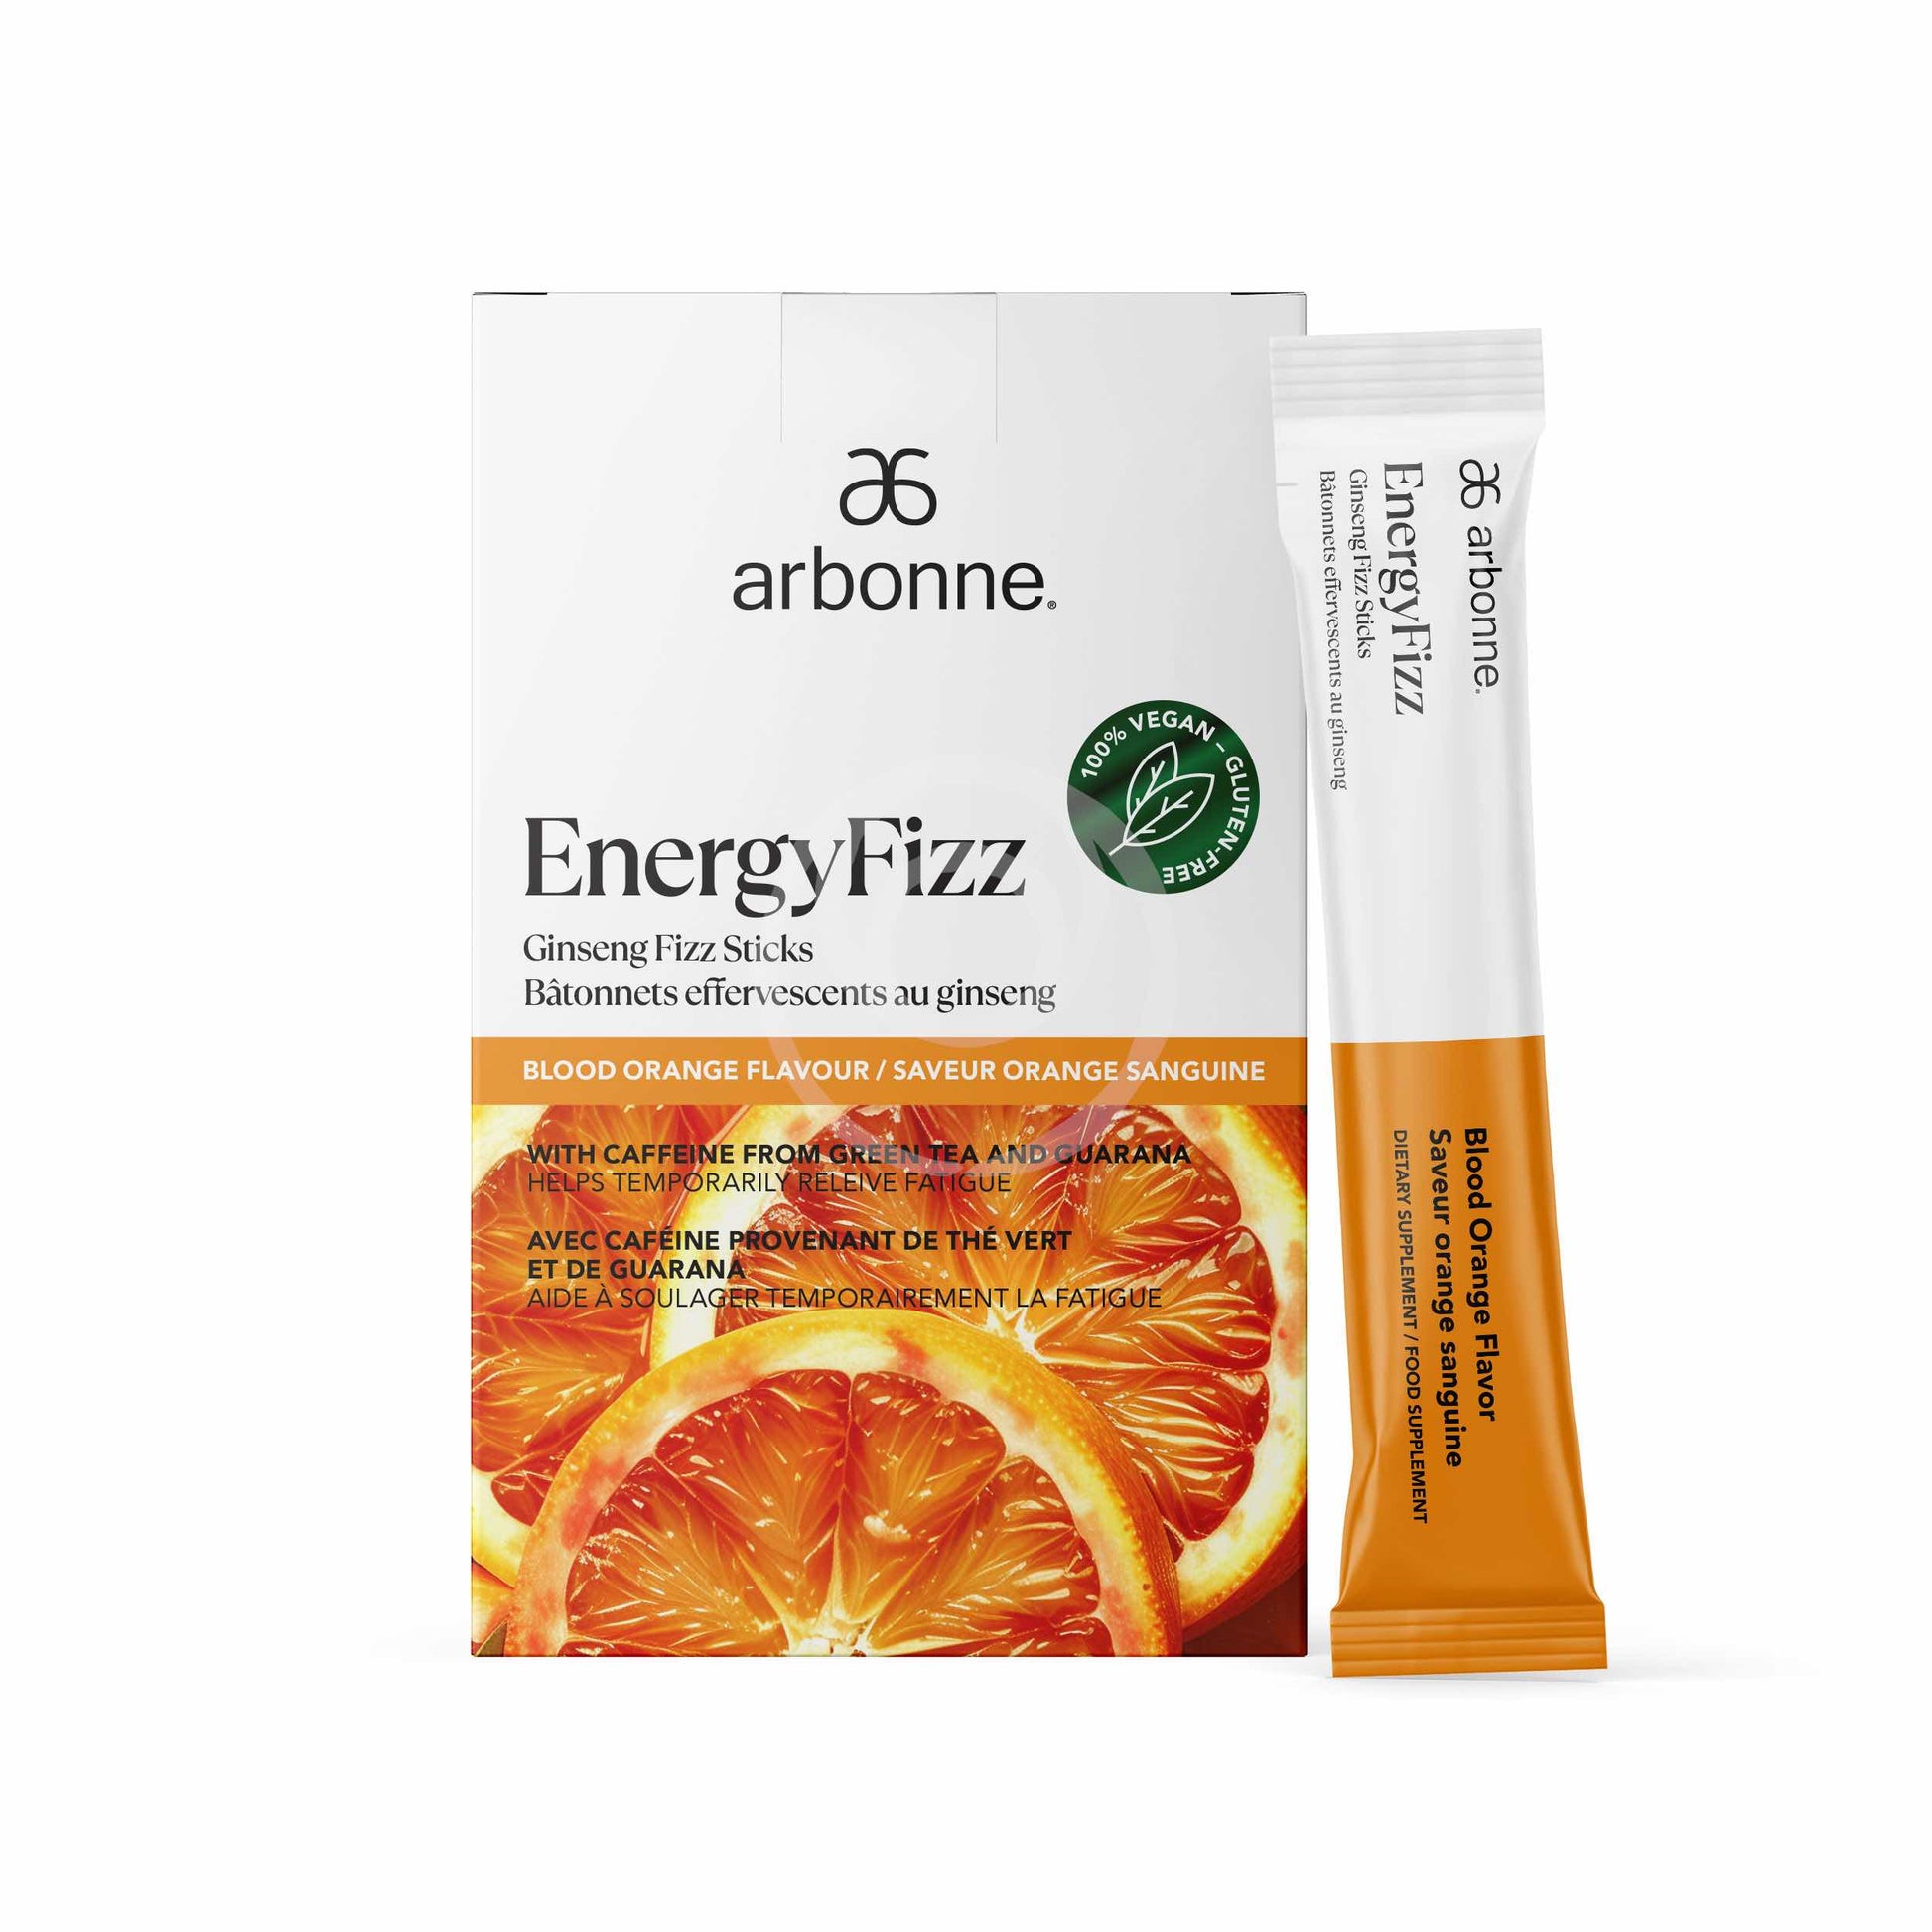 Arbonne EnergyFizz Ginseng Fizz Sticks in Blood Orange Flavor, dietary supplement with caffeine from green tea and guarana, displayed with vibrant orange packaging.